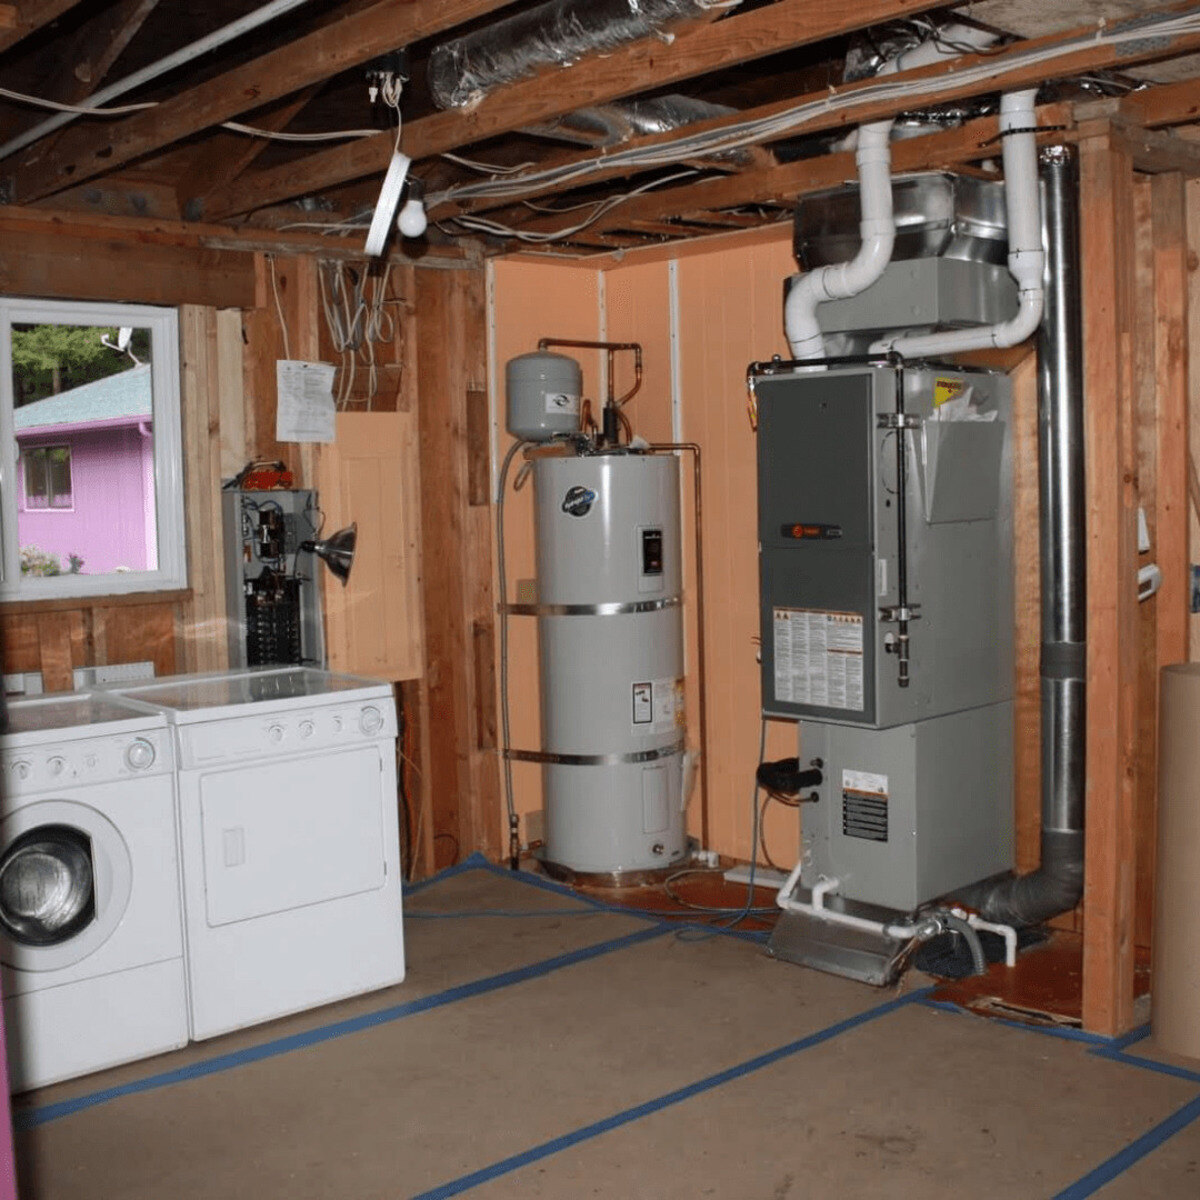 How To Hide Furnace In Laundry Room